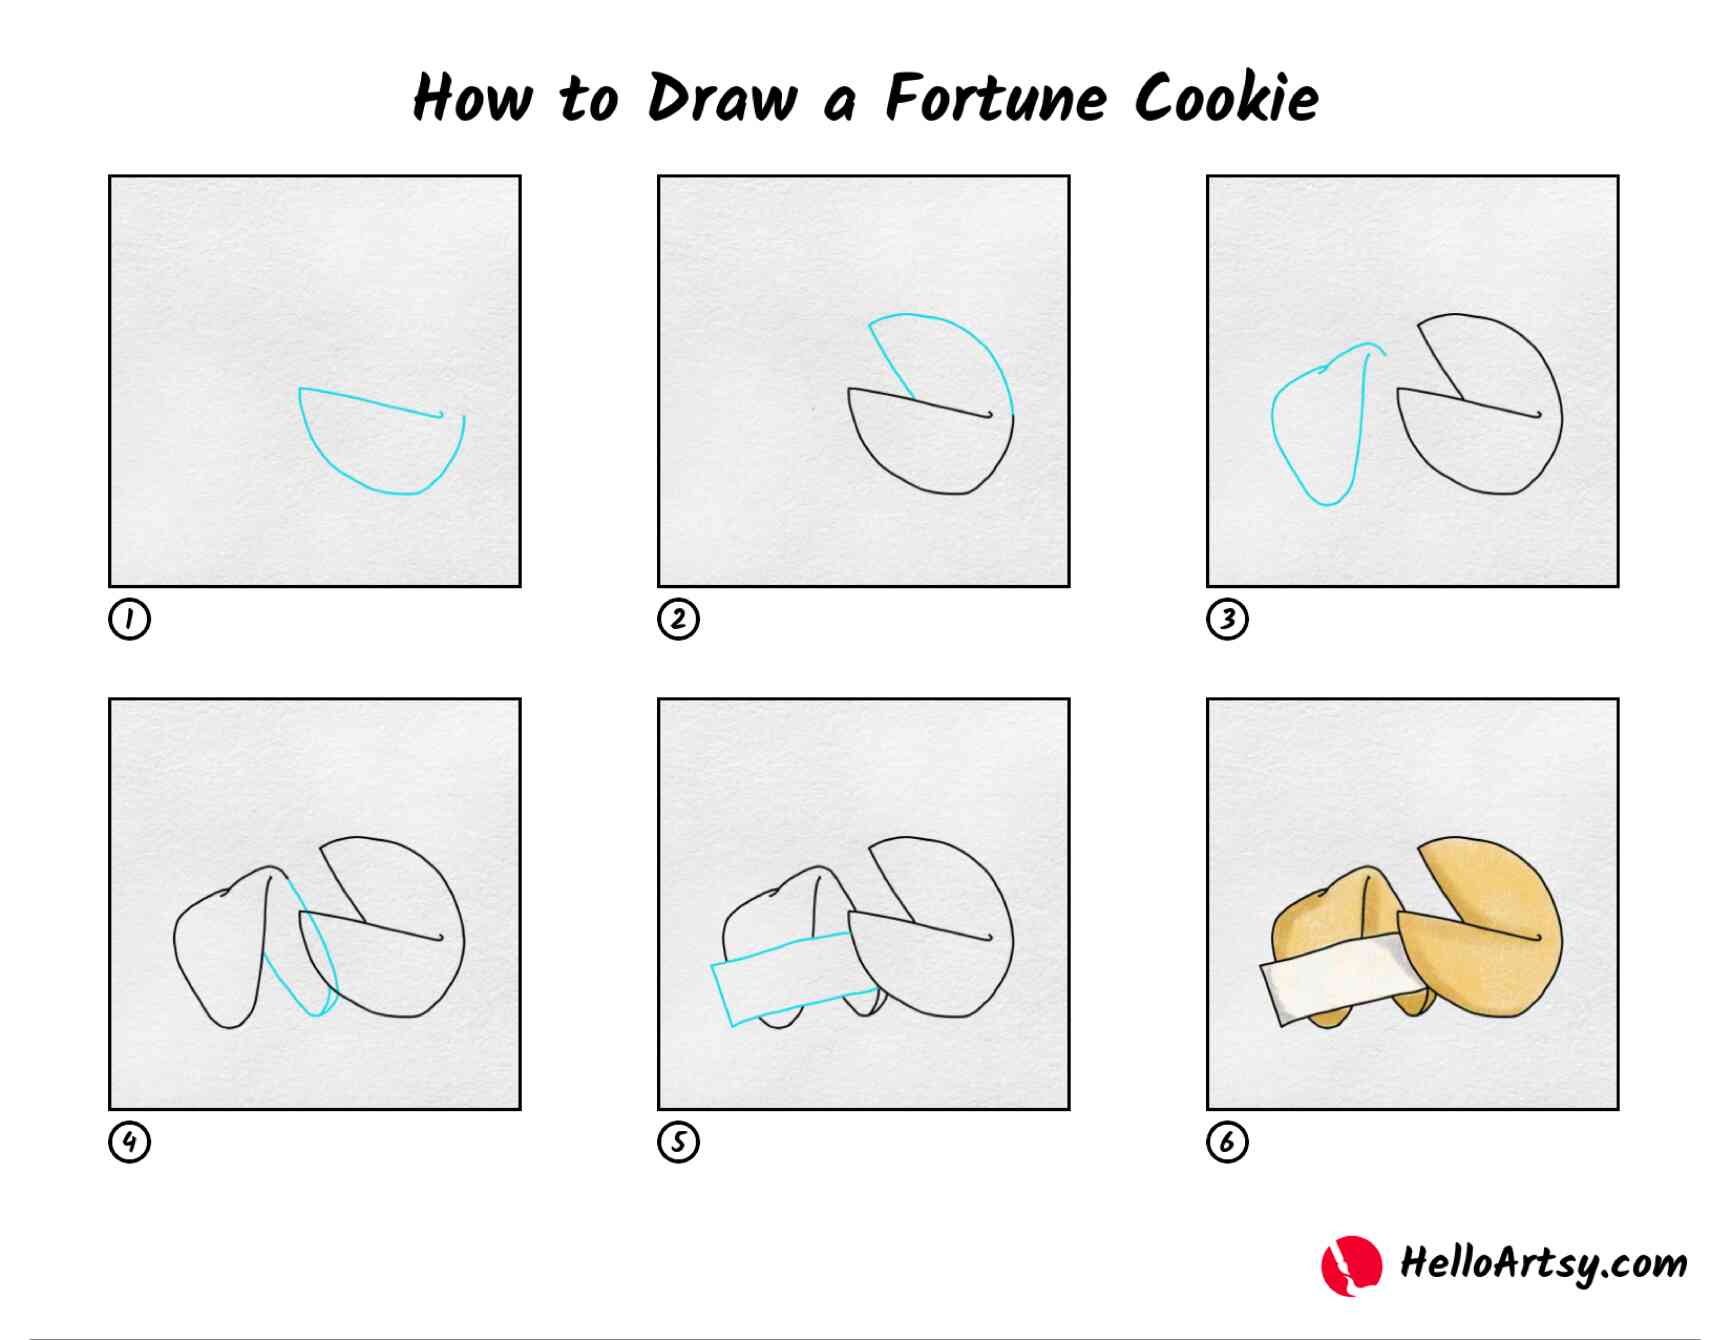 How to draw a fortune cookie